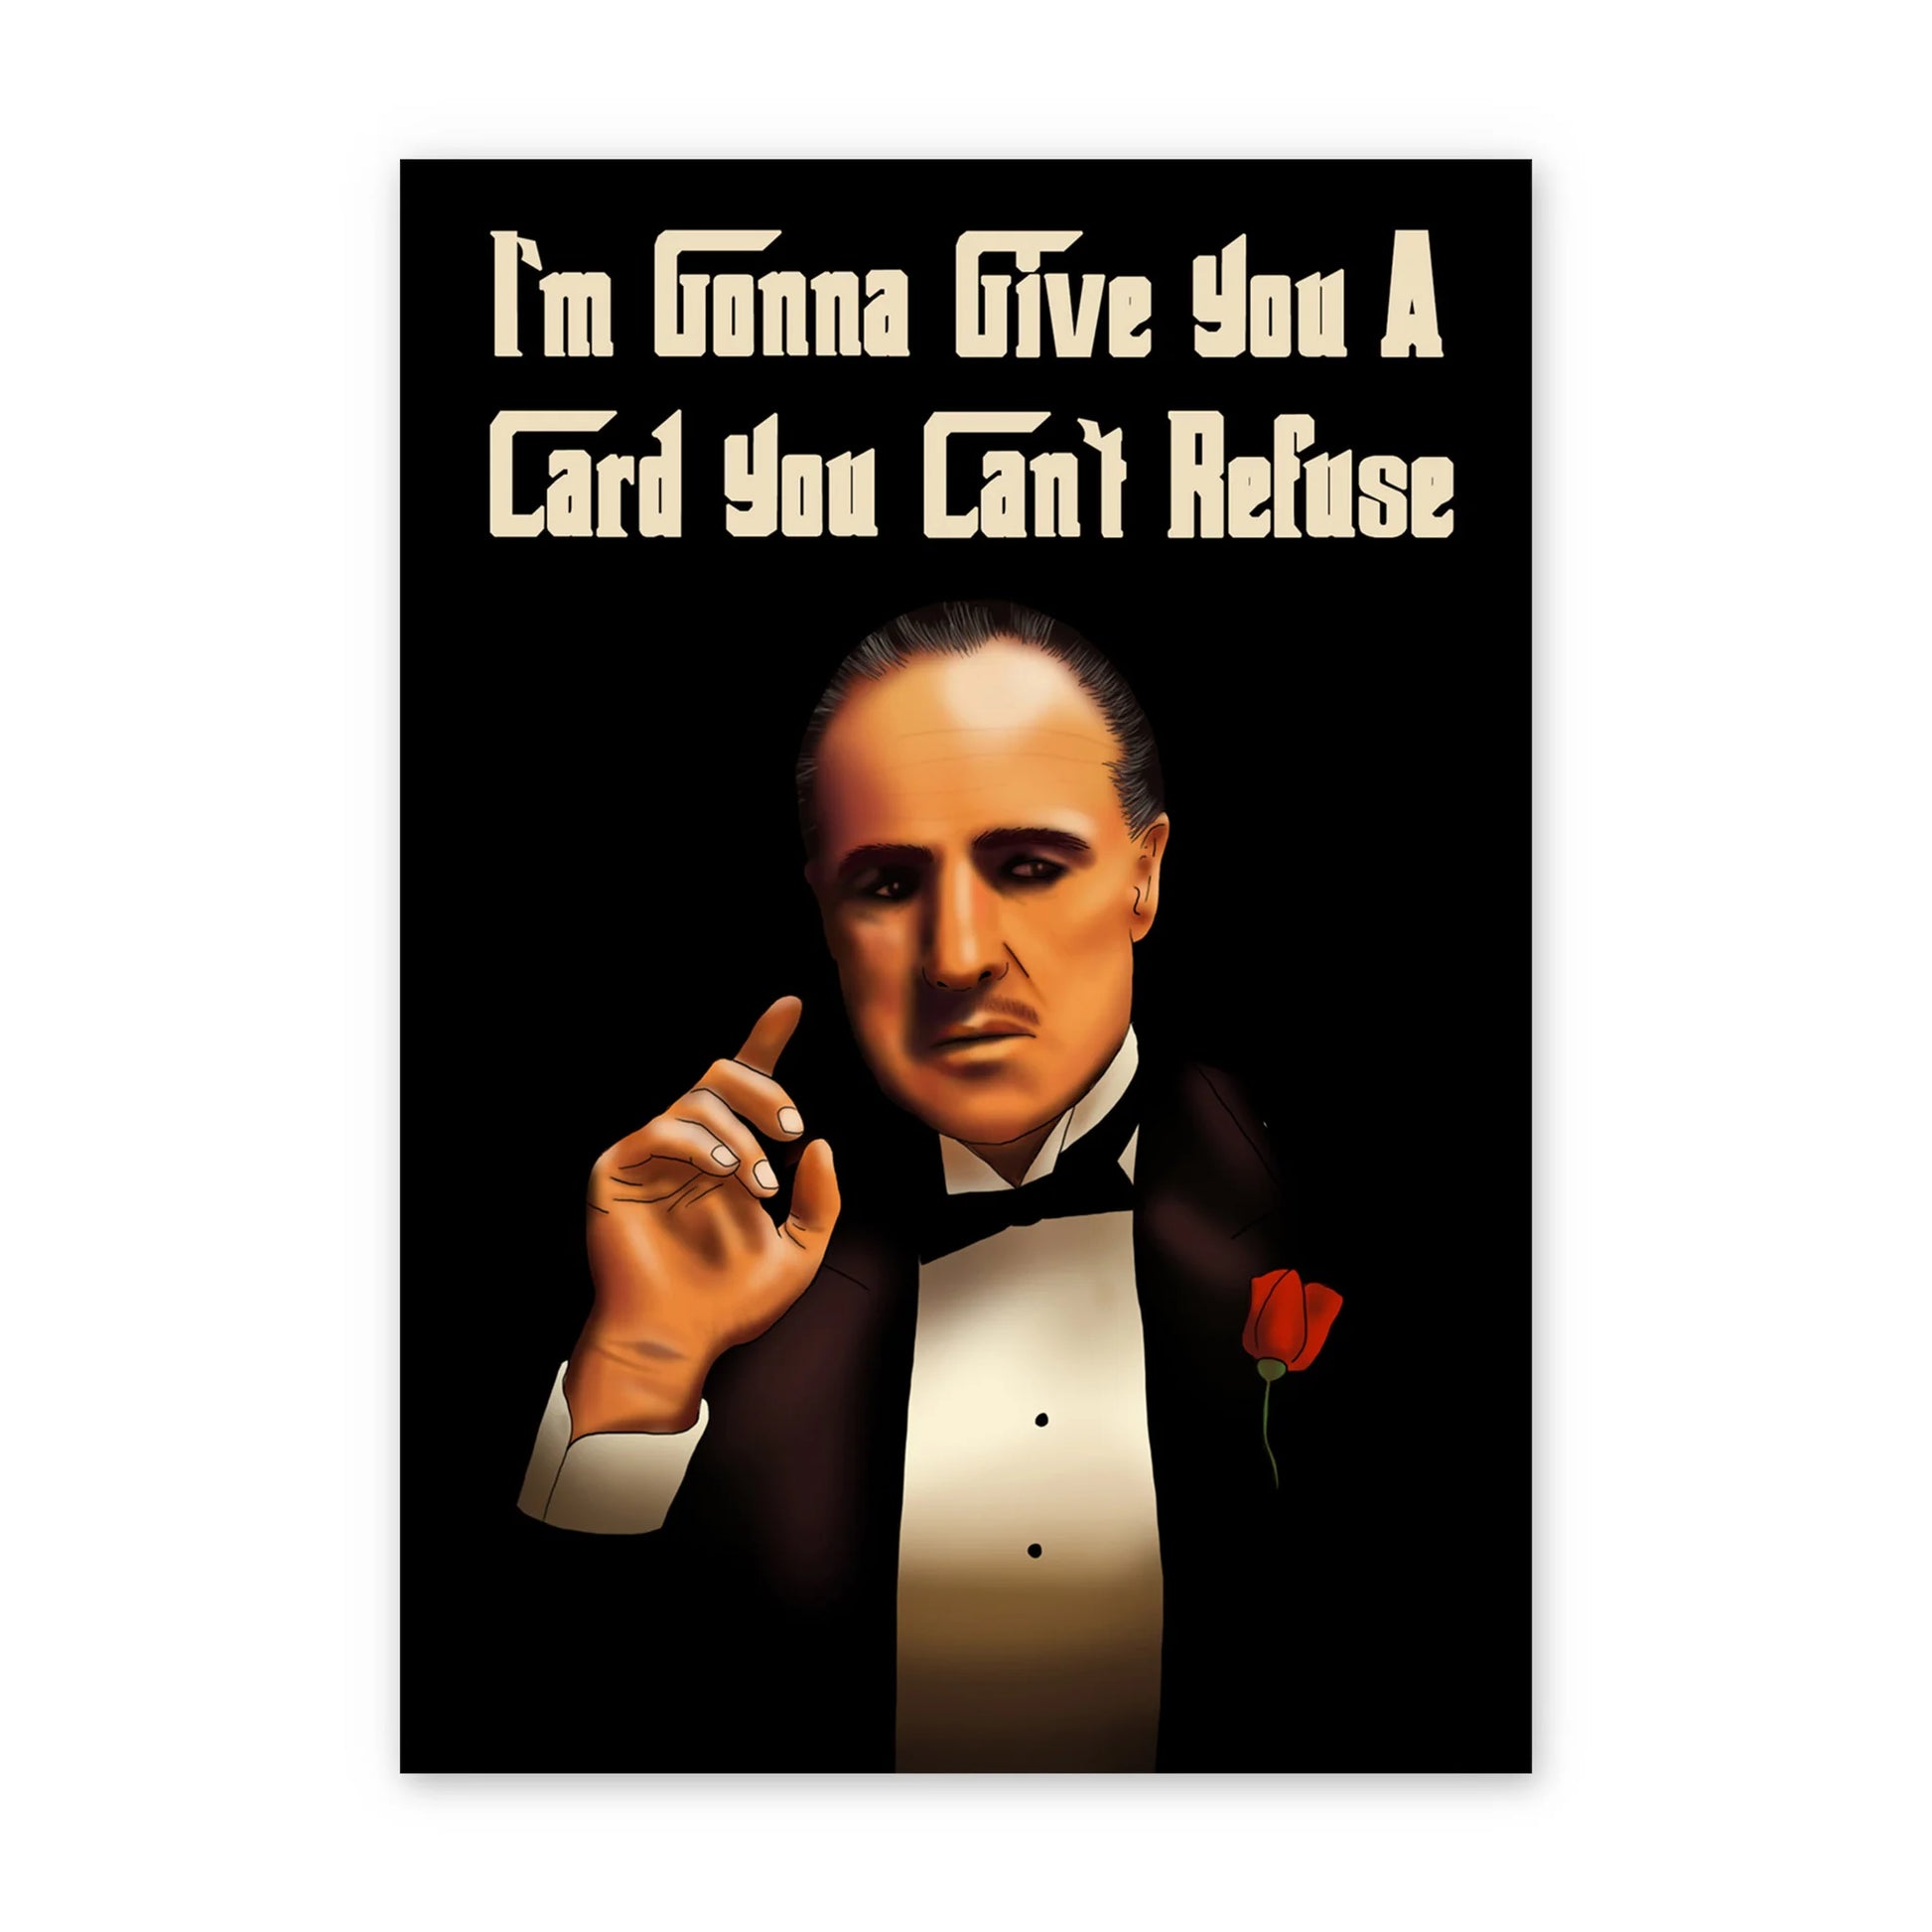 greeting card with message i'm gonna give you a card you can't refuse with an image of the godfather